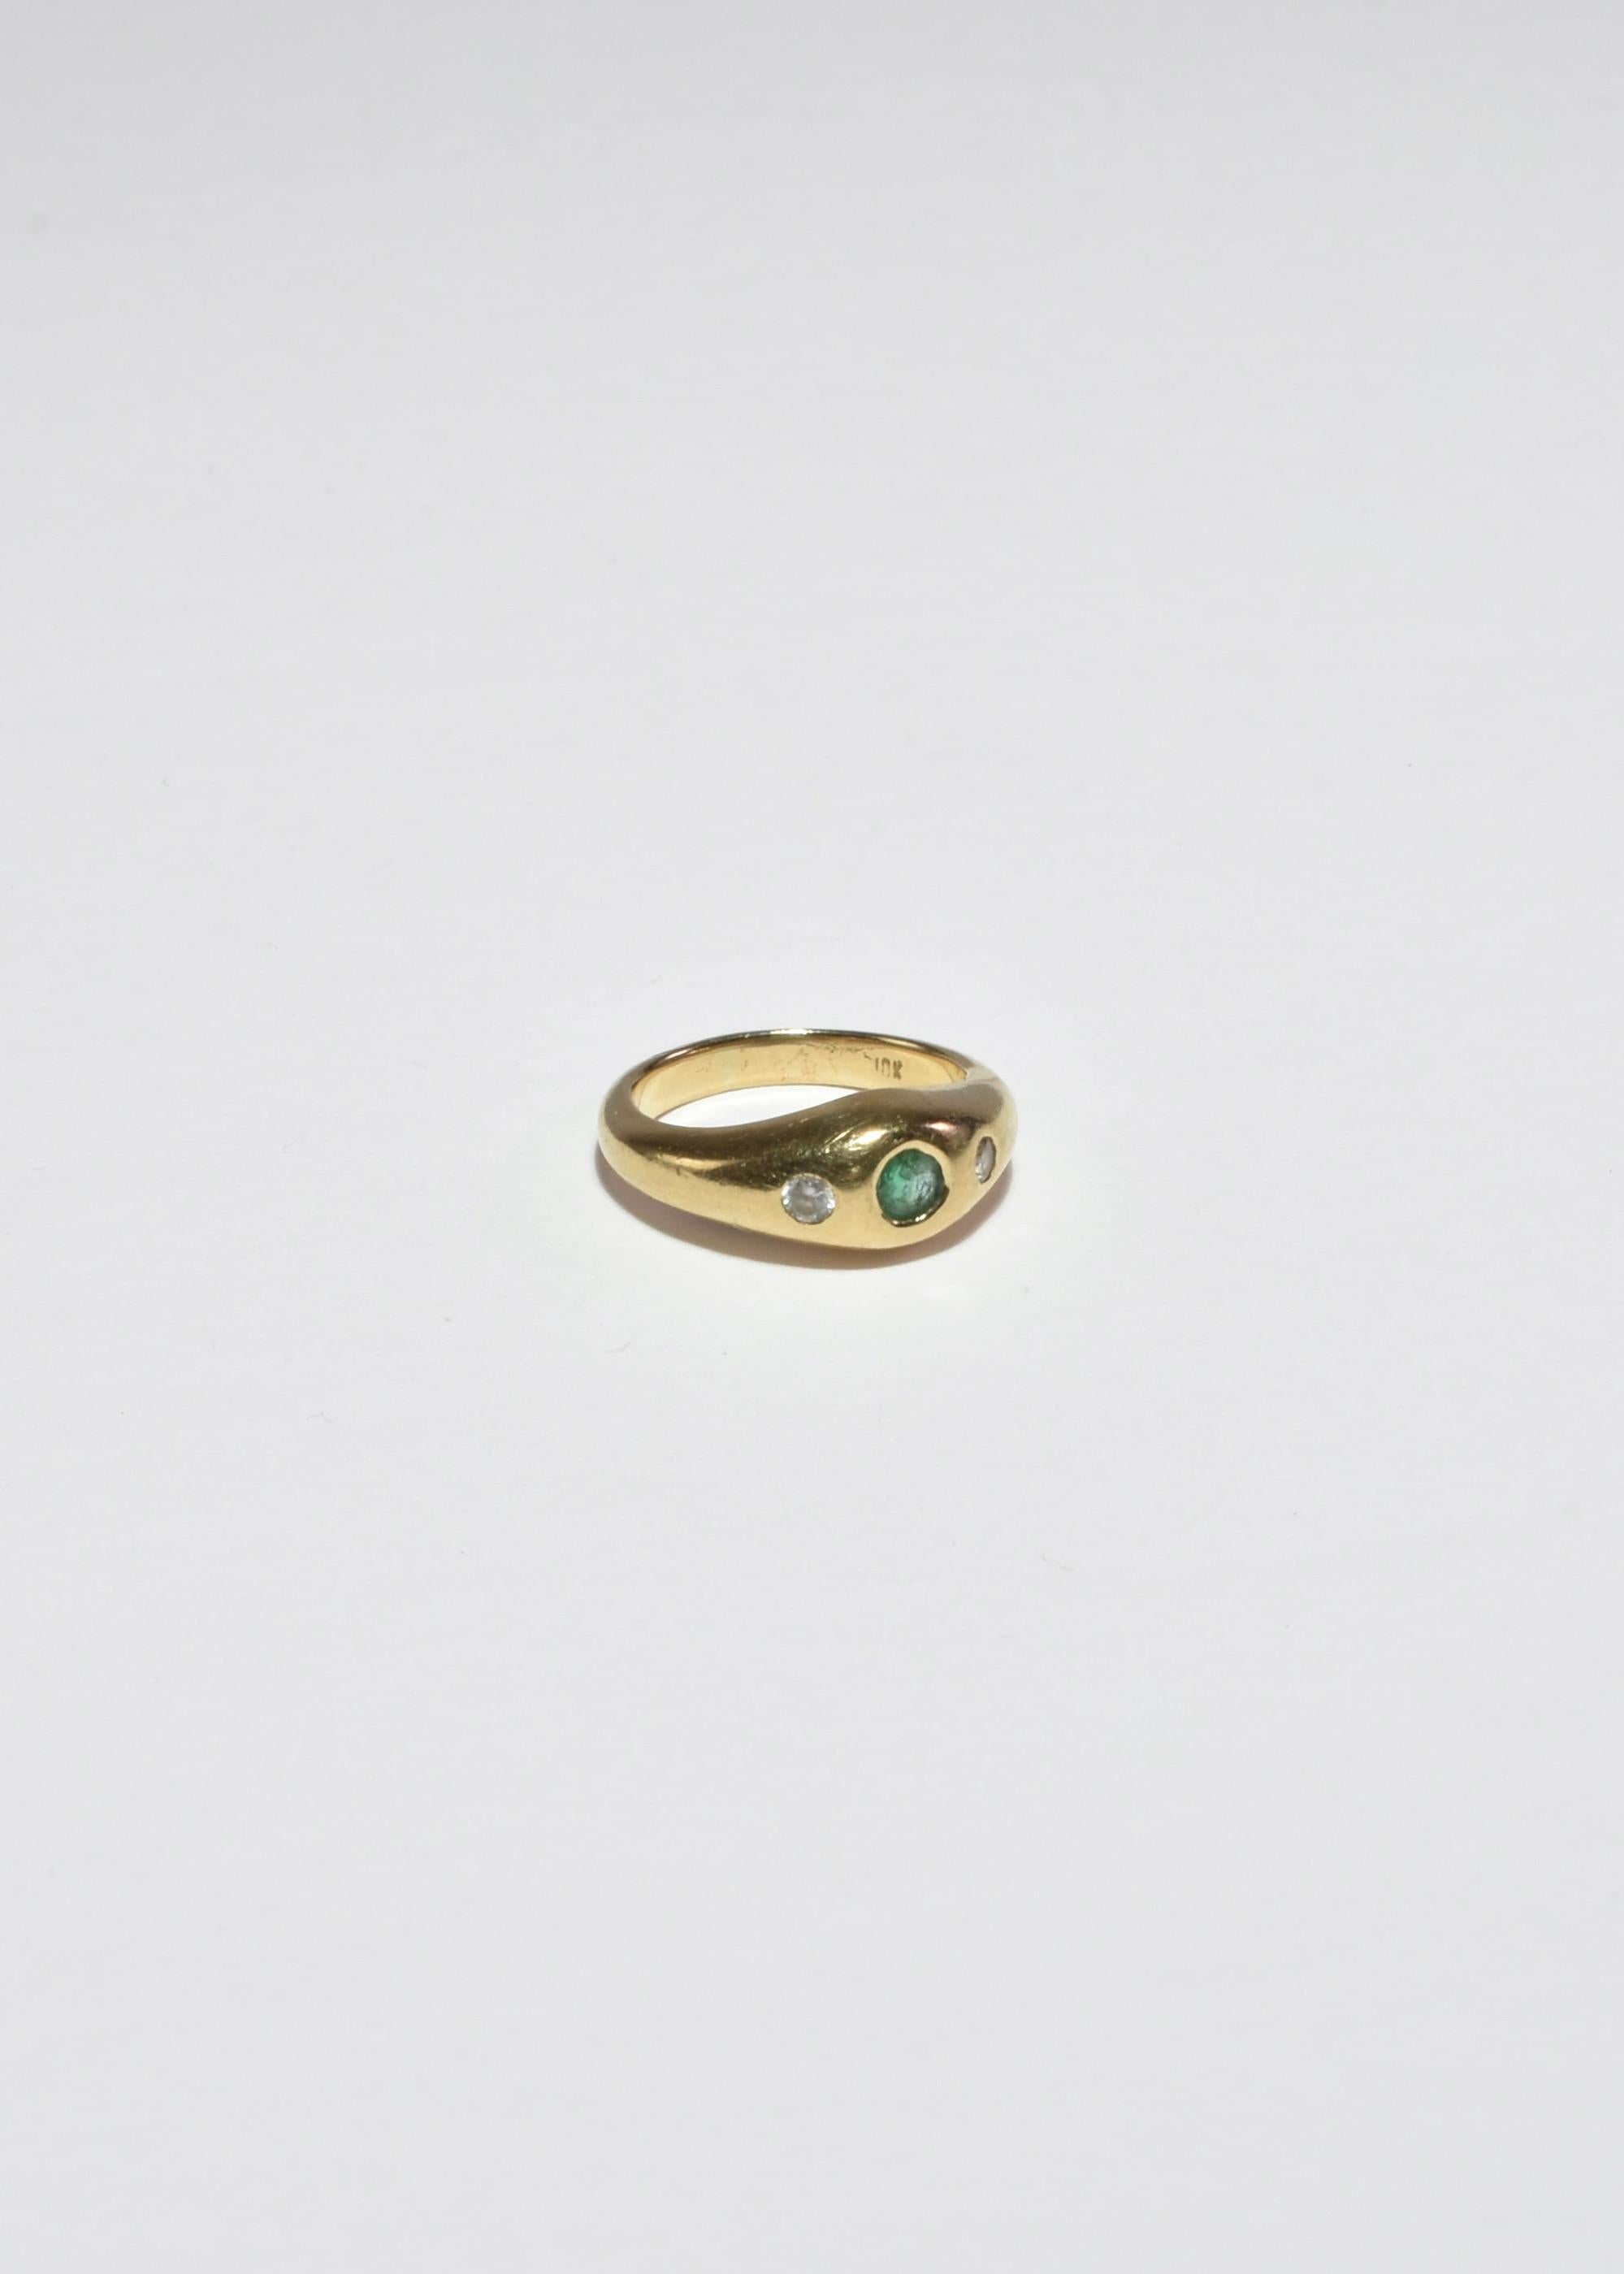 Stunning vintage gold ring with faceted emerald and diamond stones. Stamped 10k.

Material: 10k gold, emerald, diamond.